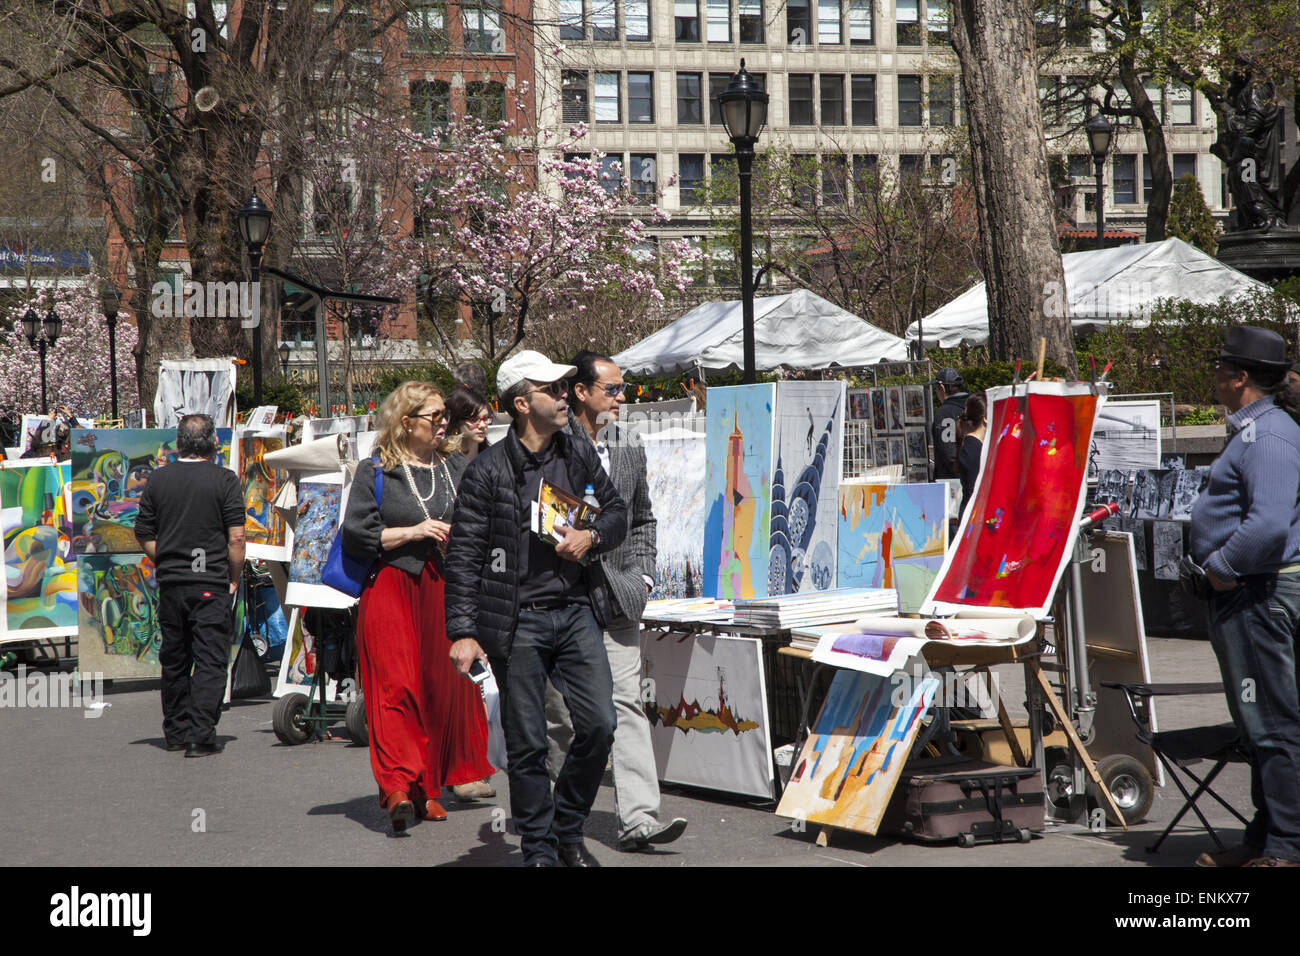 Artists sell their works at the weekly art market along Union Square in Manhattan, NYC. Stock Photo